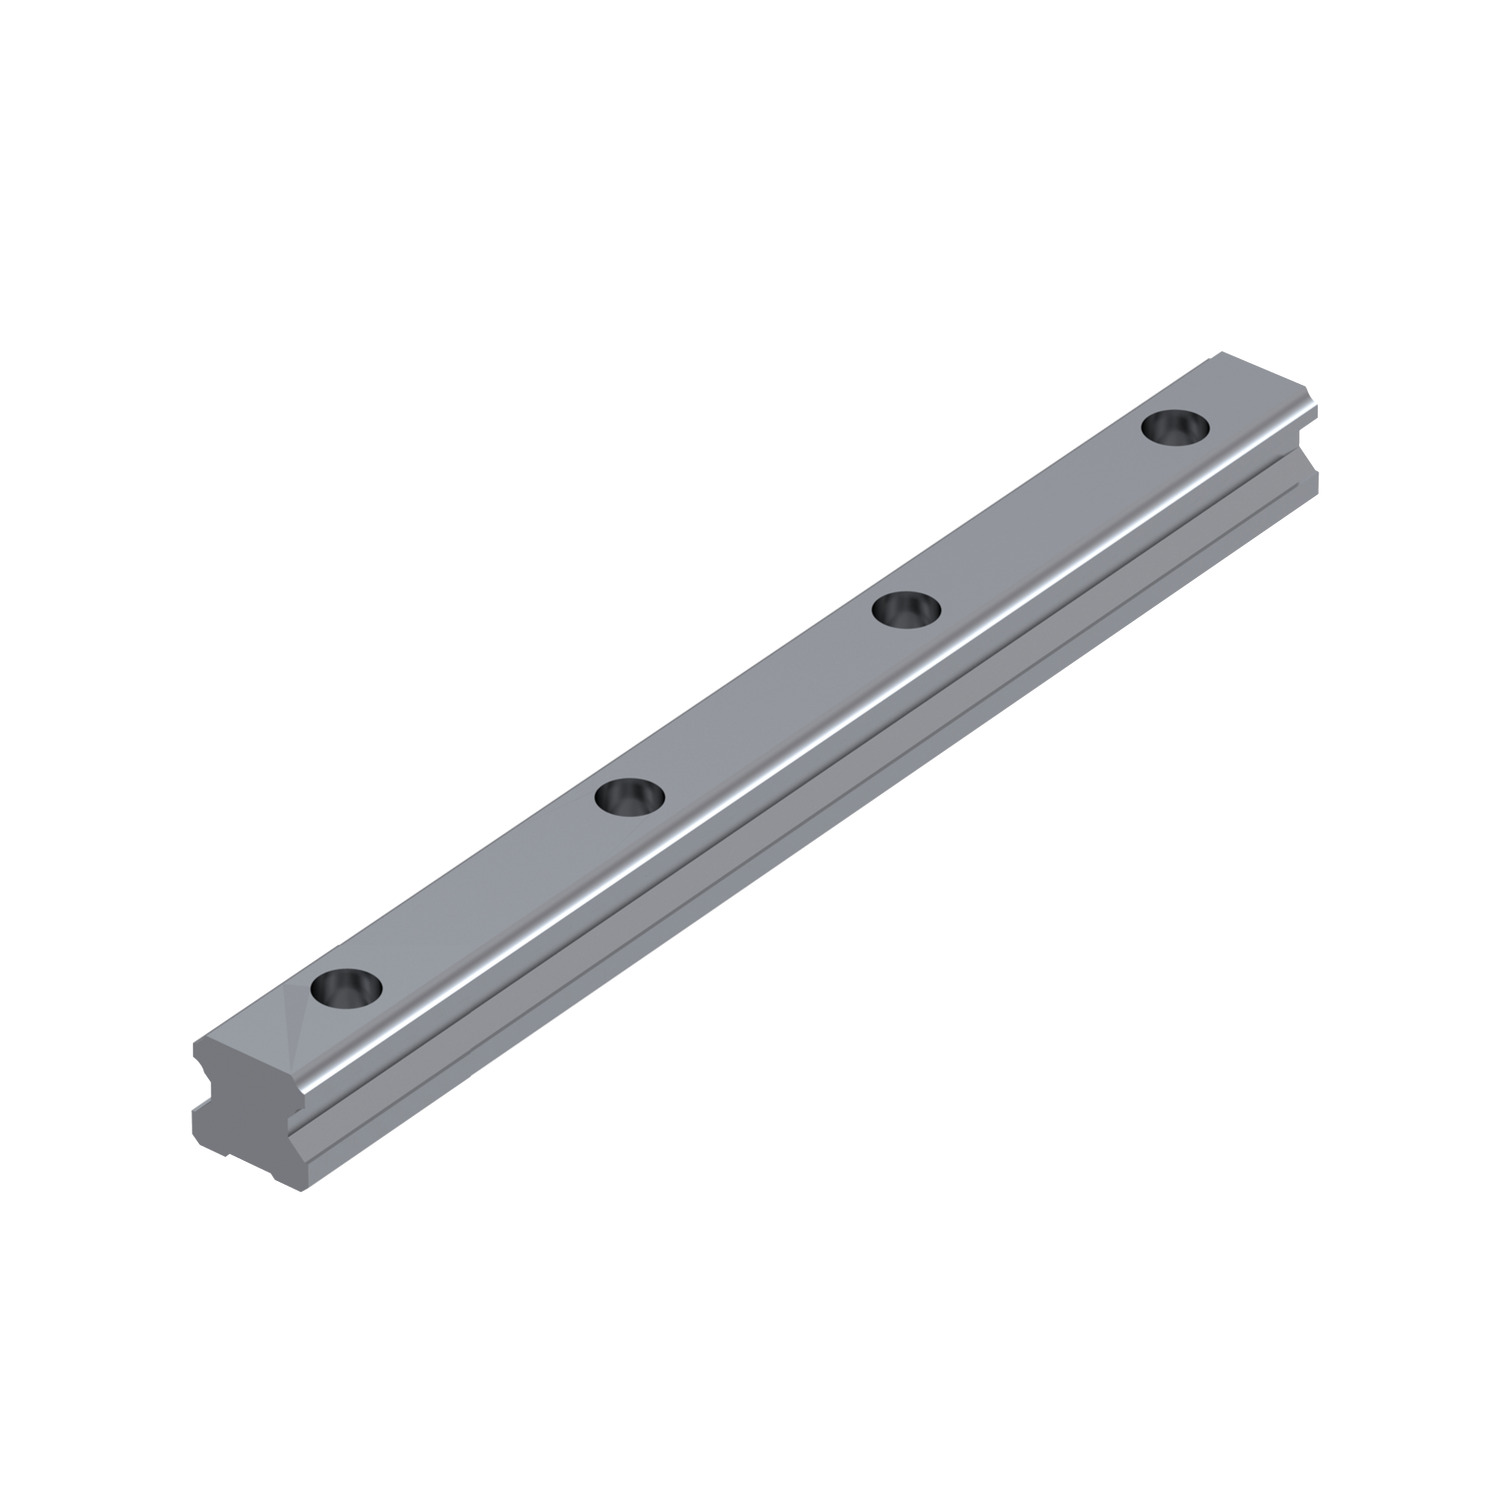 L1016.15-1480 Linear guide rail 15mm 1480 Hardened and ground steel. EC:20162689 WG:05063055288828